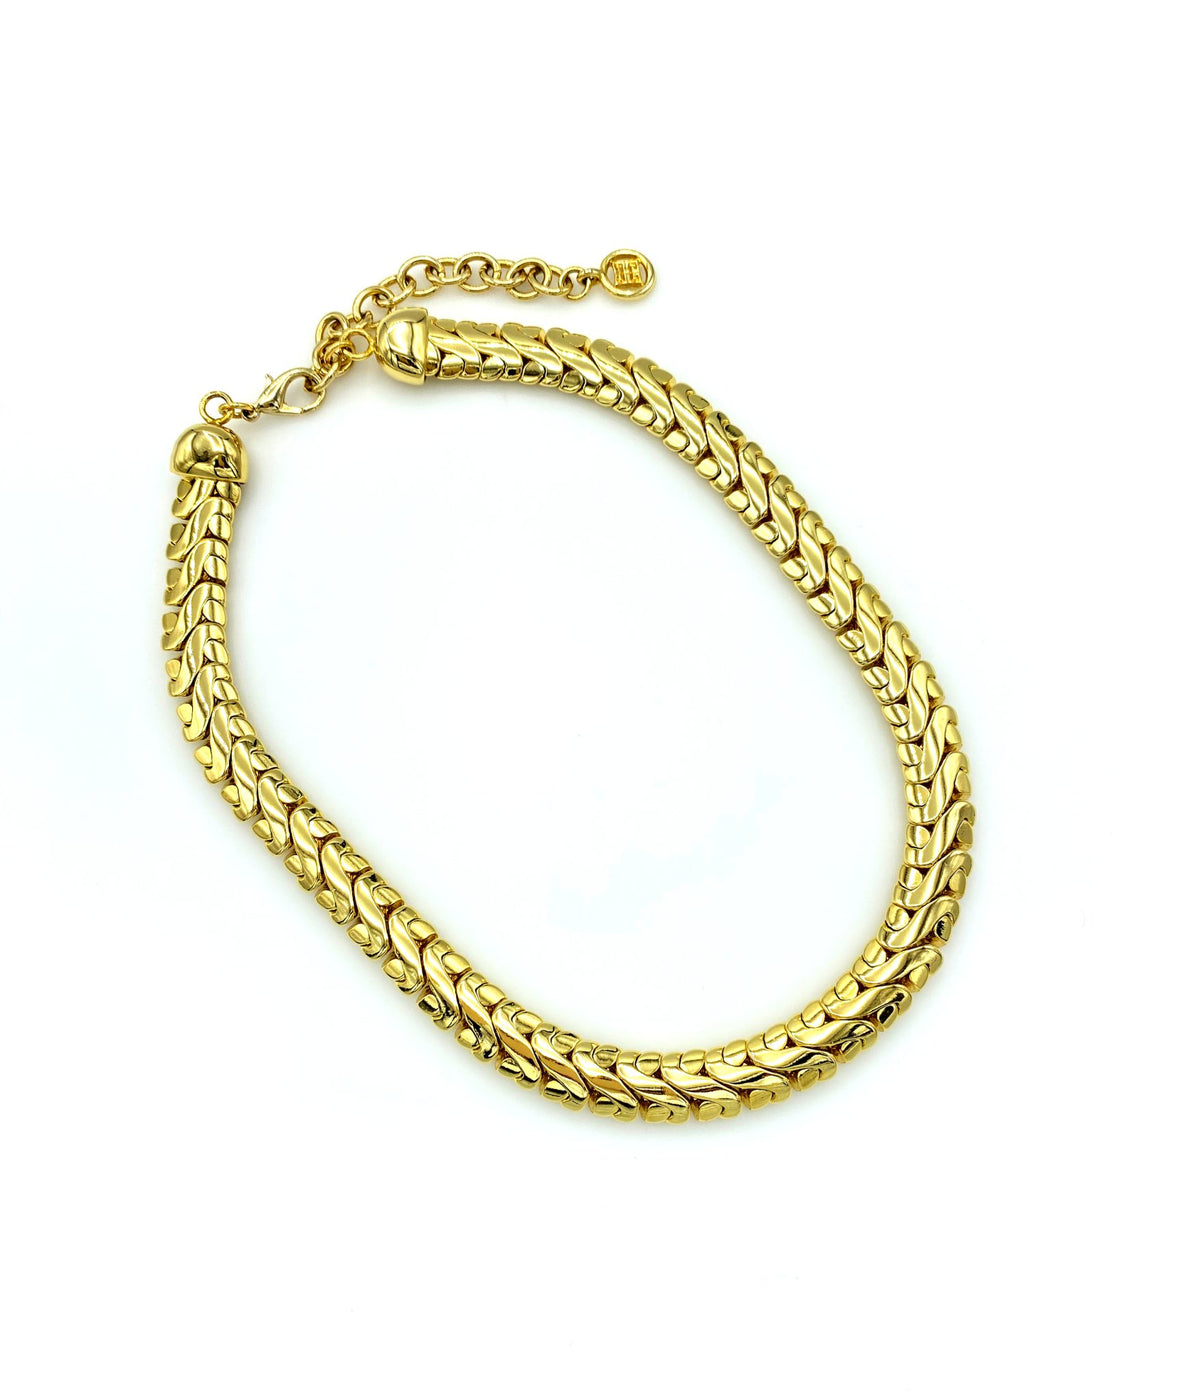 Givenchy Thick Chain Vintage Necklace - 24 Wishes Vintage Jewelry